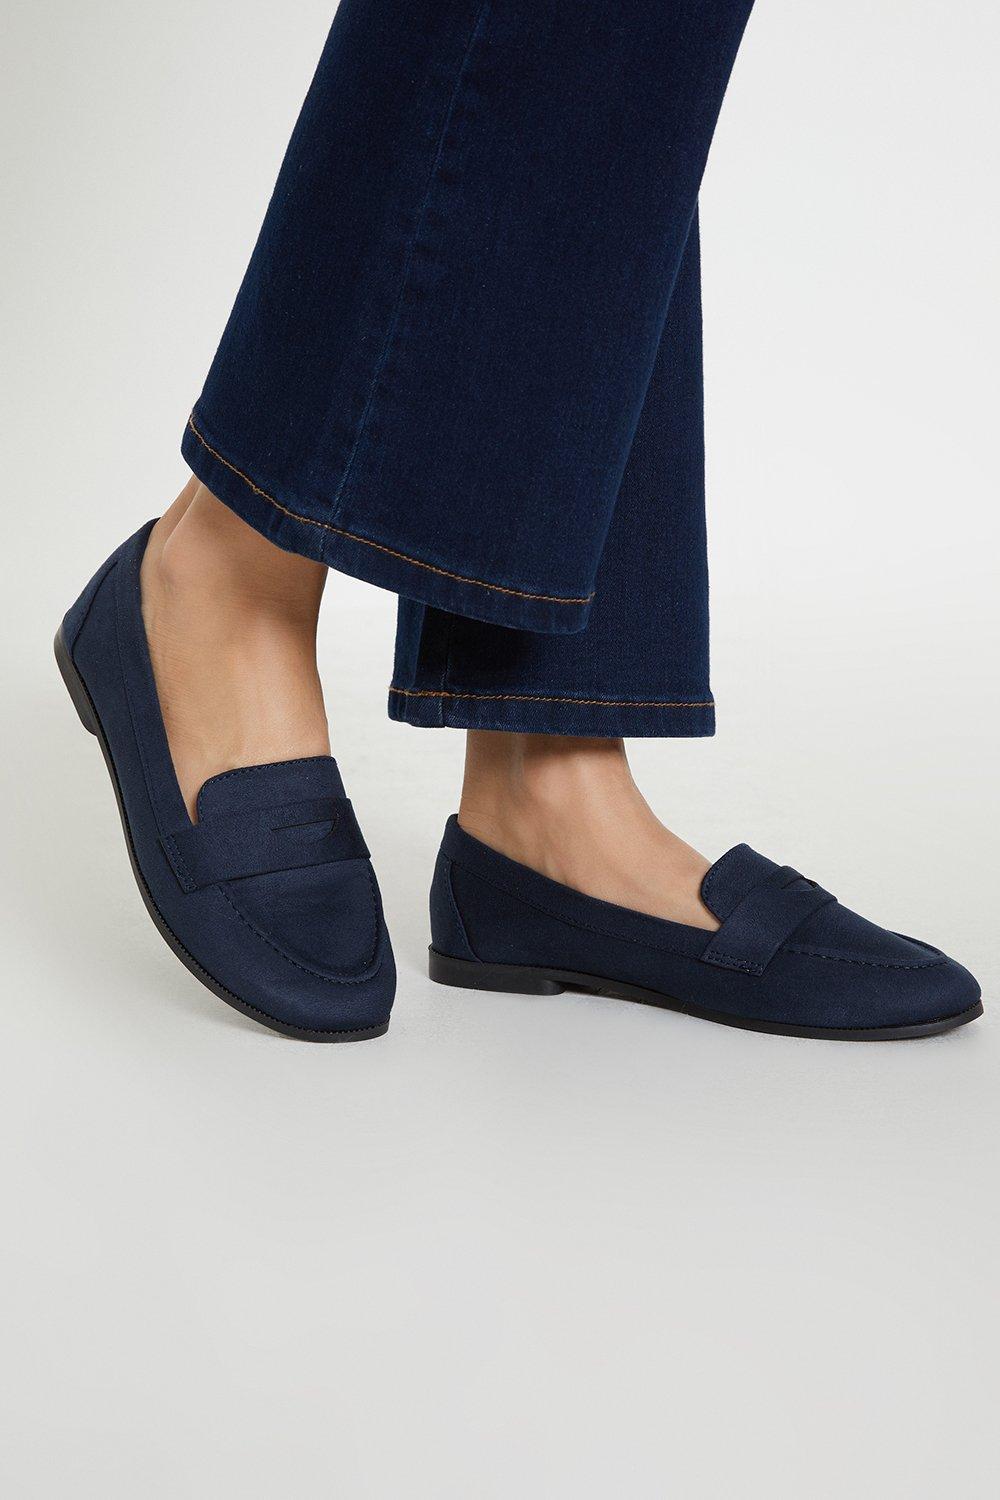 Women’s Wide Fit Lana Penny Loafers - navy - 7